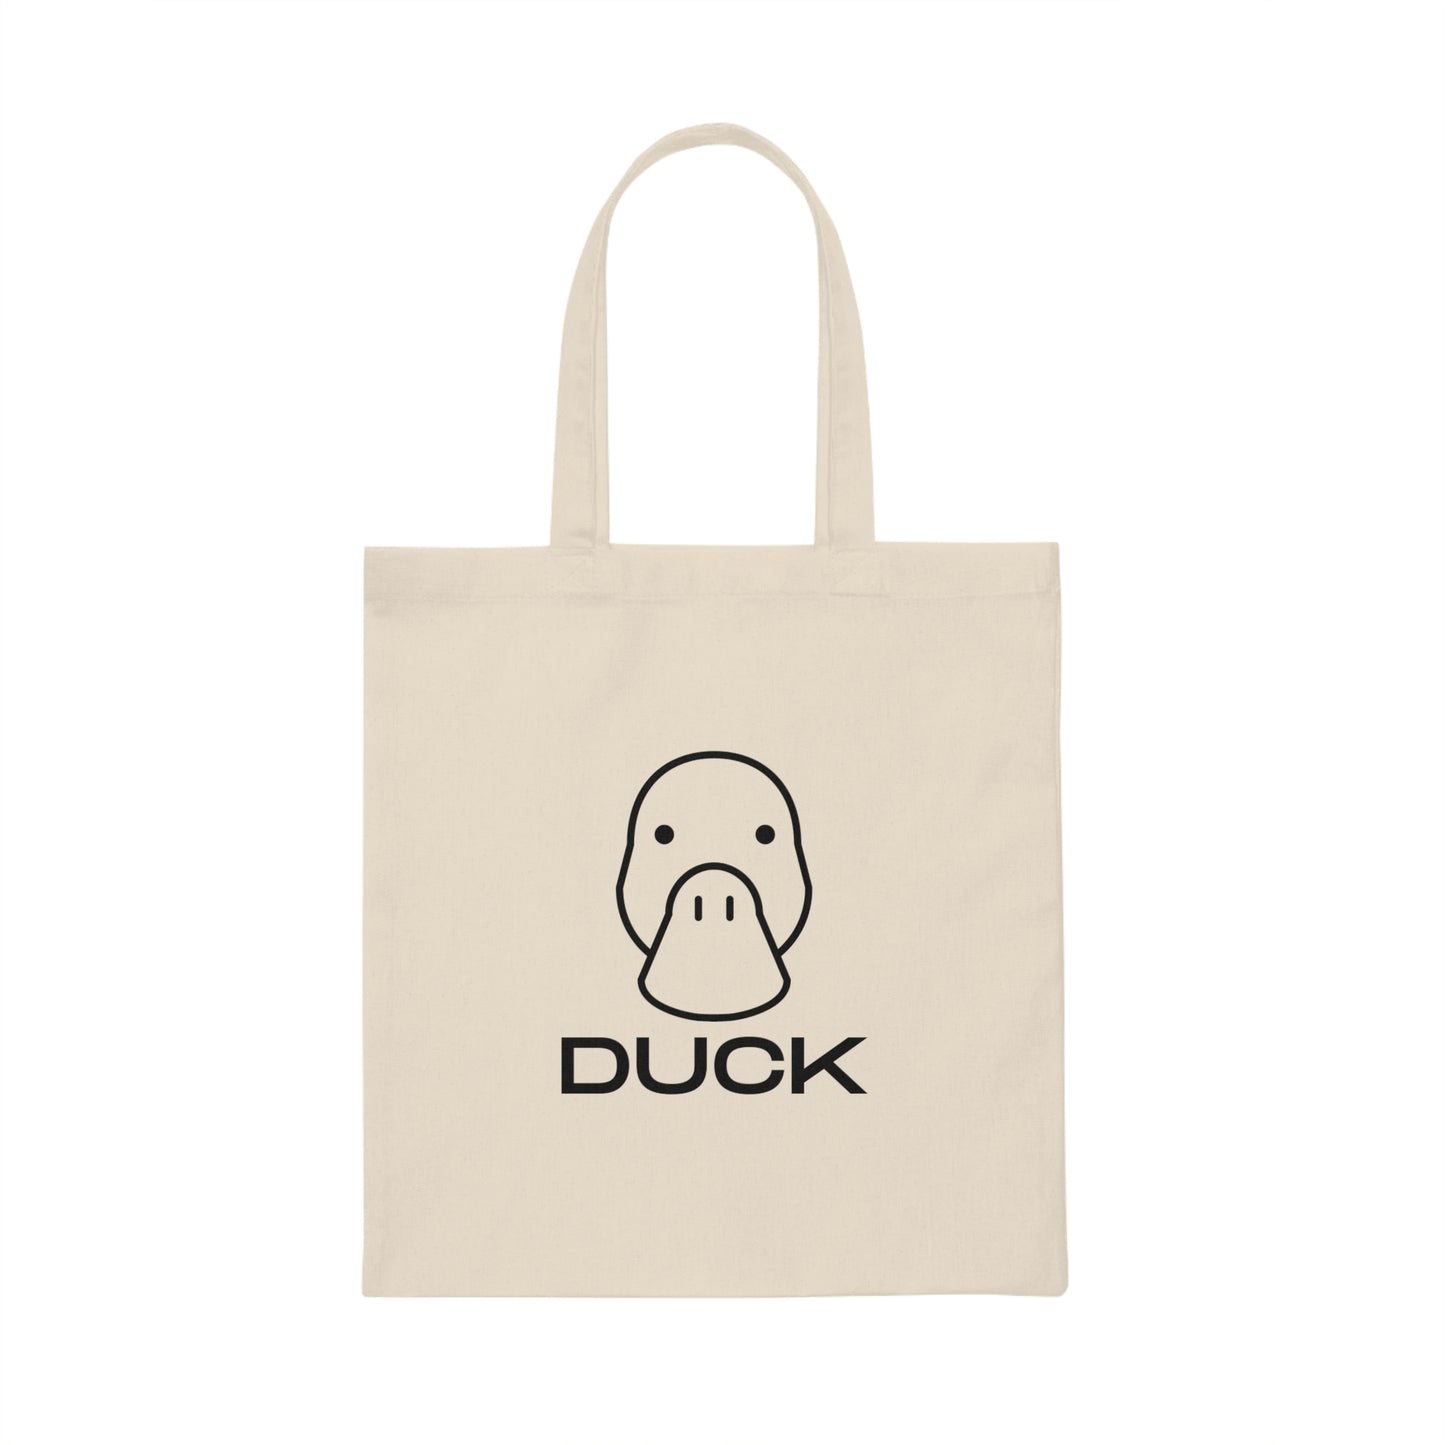 Just Say "Duck" Canvas Tote Bag